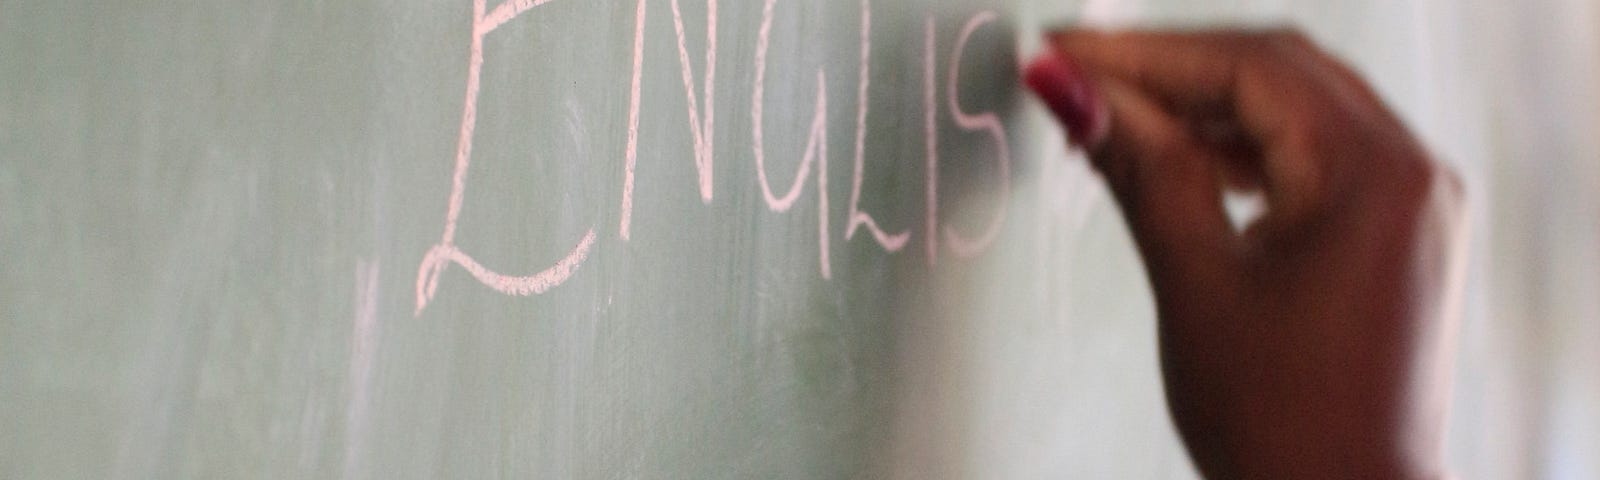 Hand holding a chalk, writing English on the chalkboard.